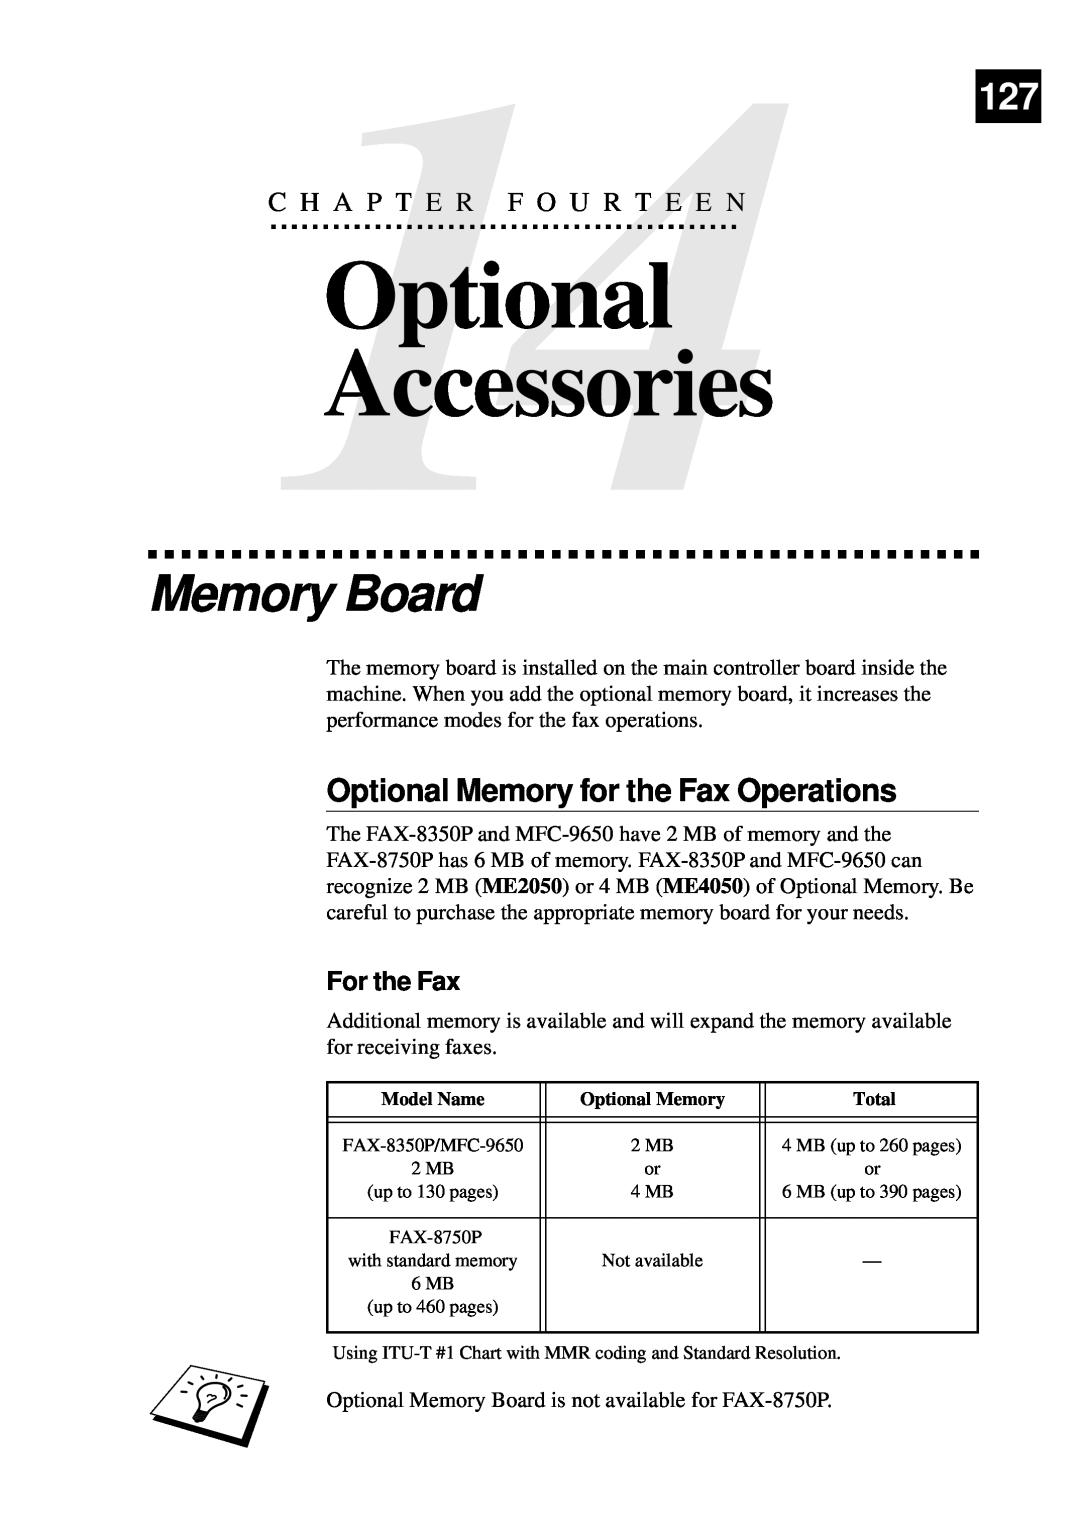 Brother MFC-9650, FAX-8350P Optional Accessories, Memory Board, Optional Memory for the Fax Operations, For the Fax 